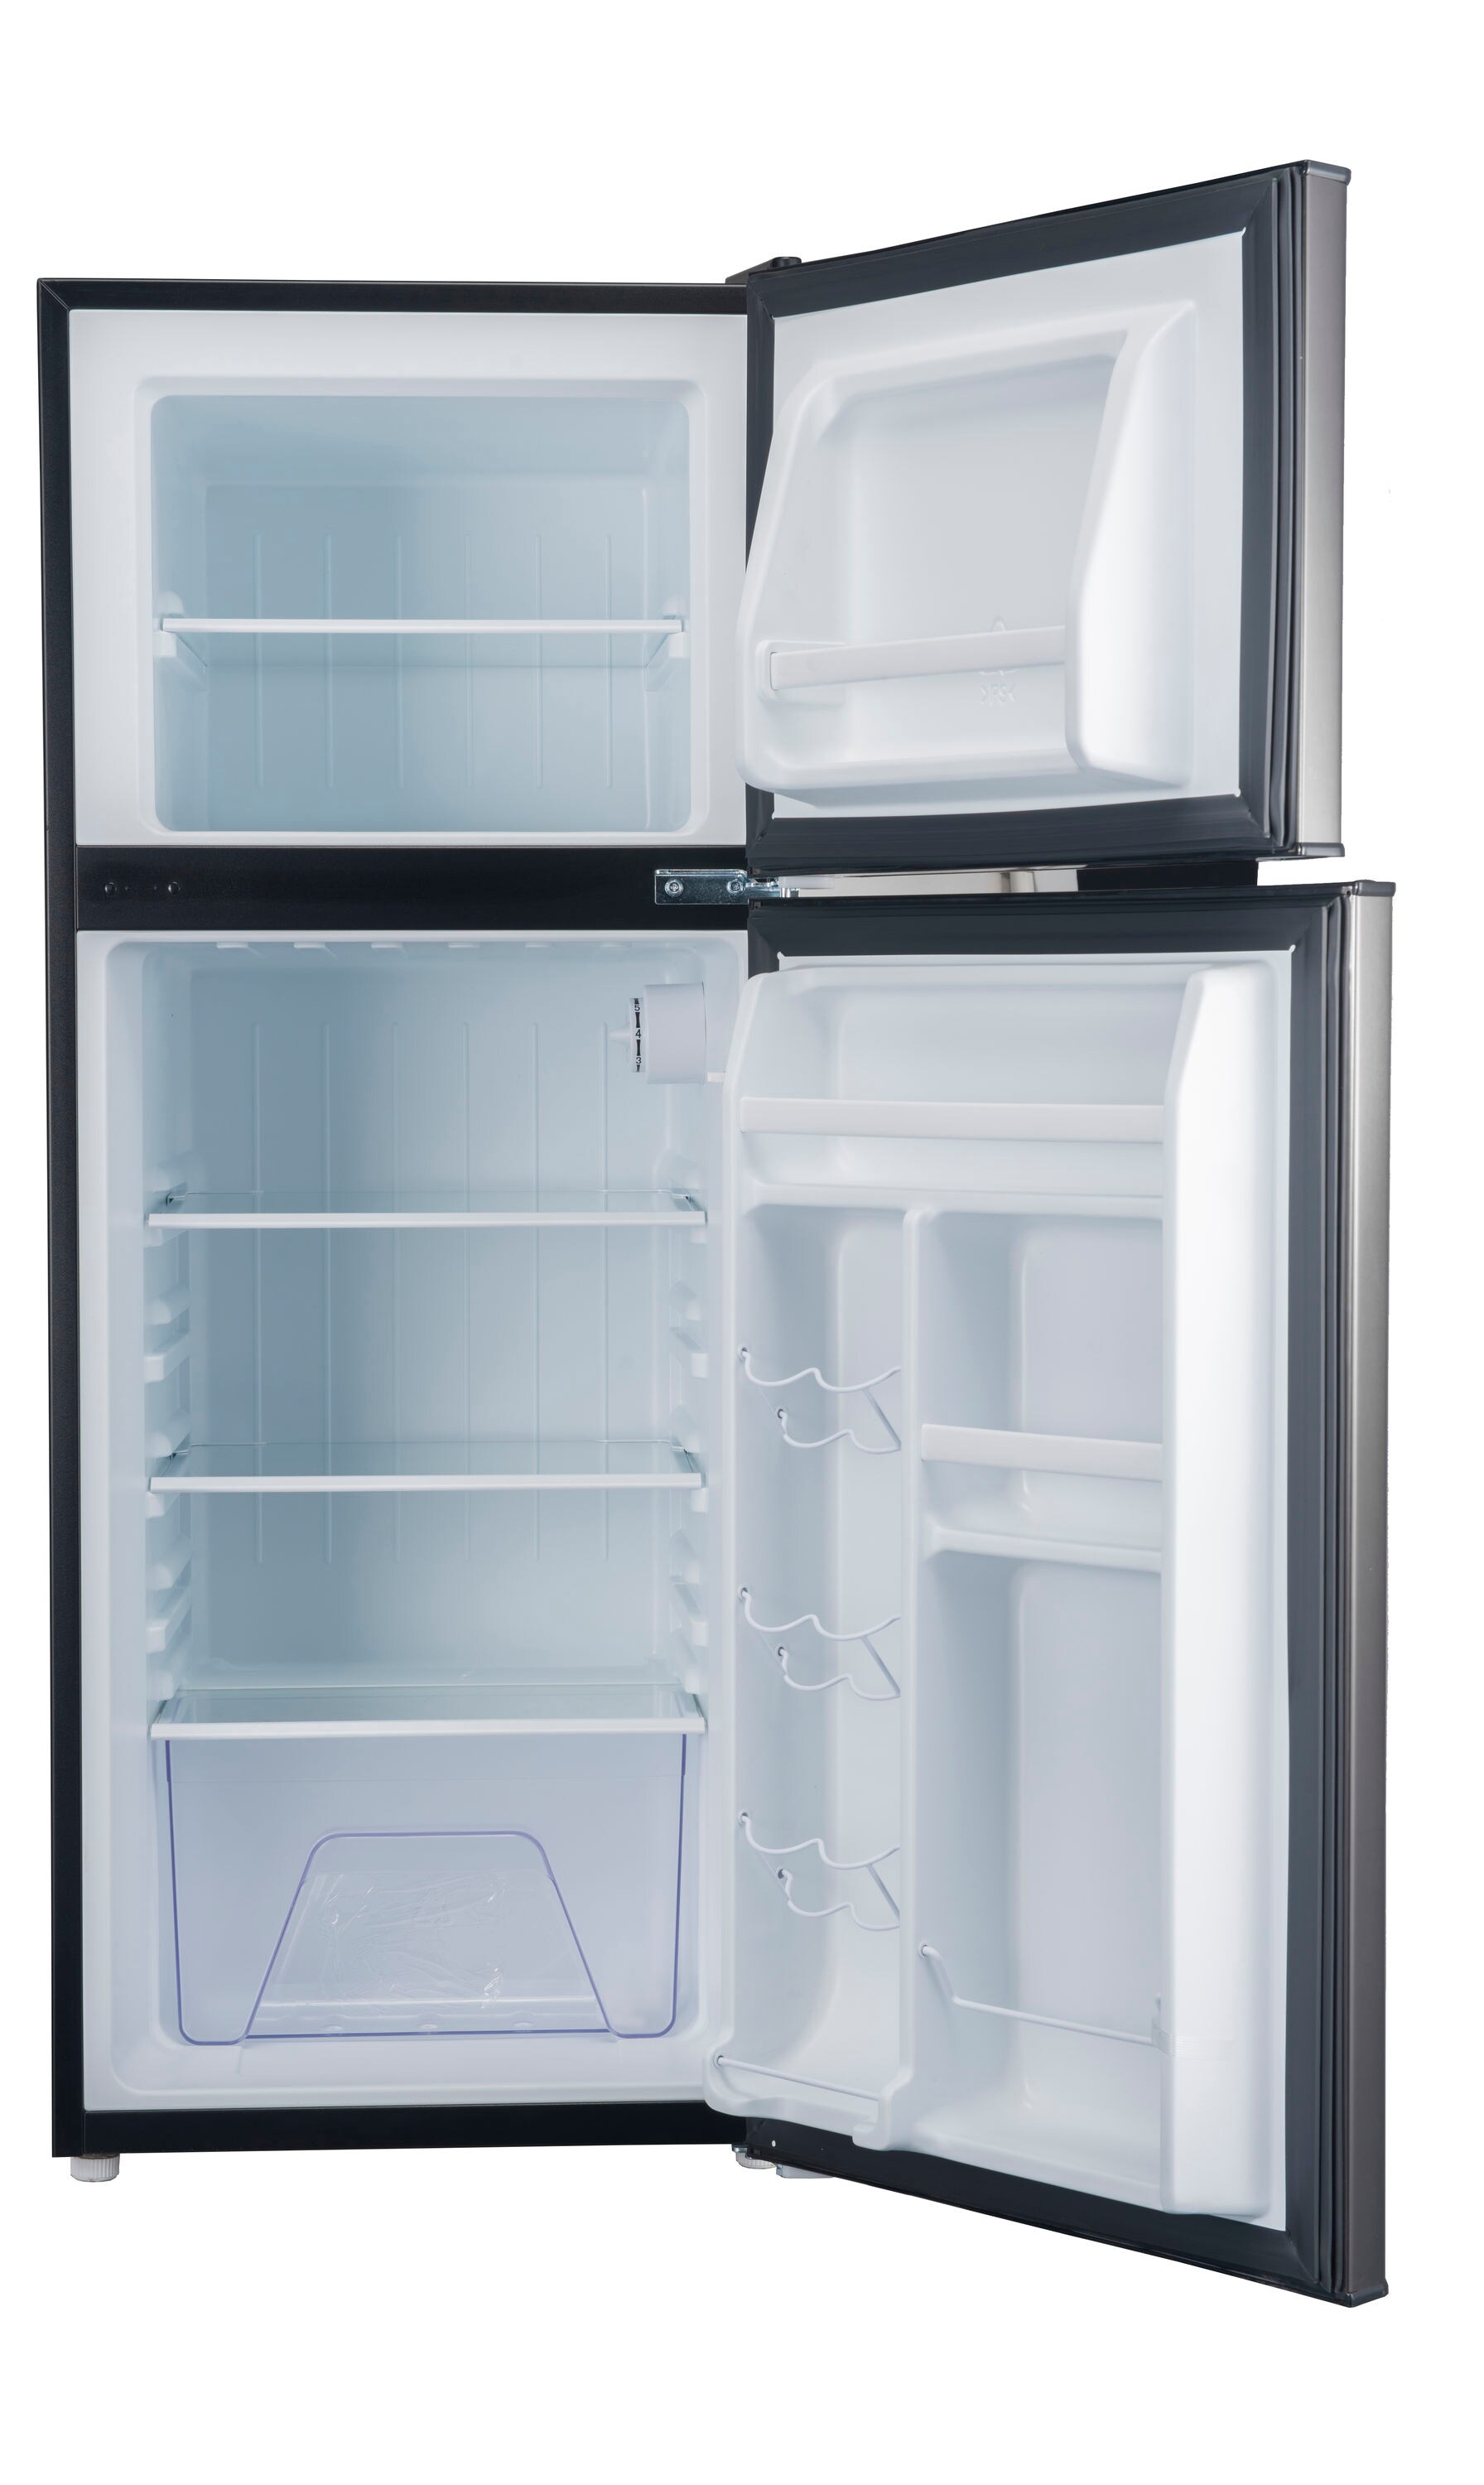 Whirlpool 4.0 Cu Ft Refrigerator Wh40s1e - Stainless Steel : Target